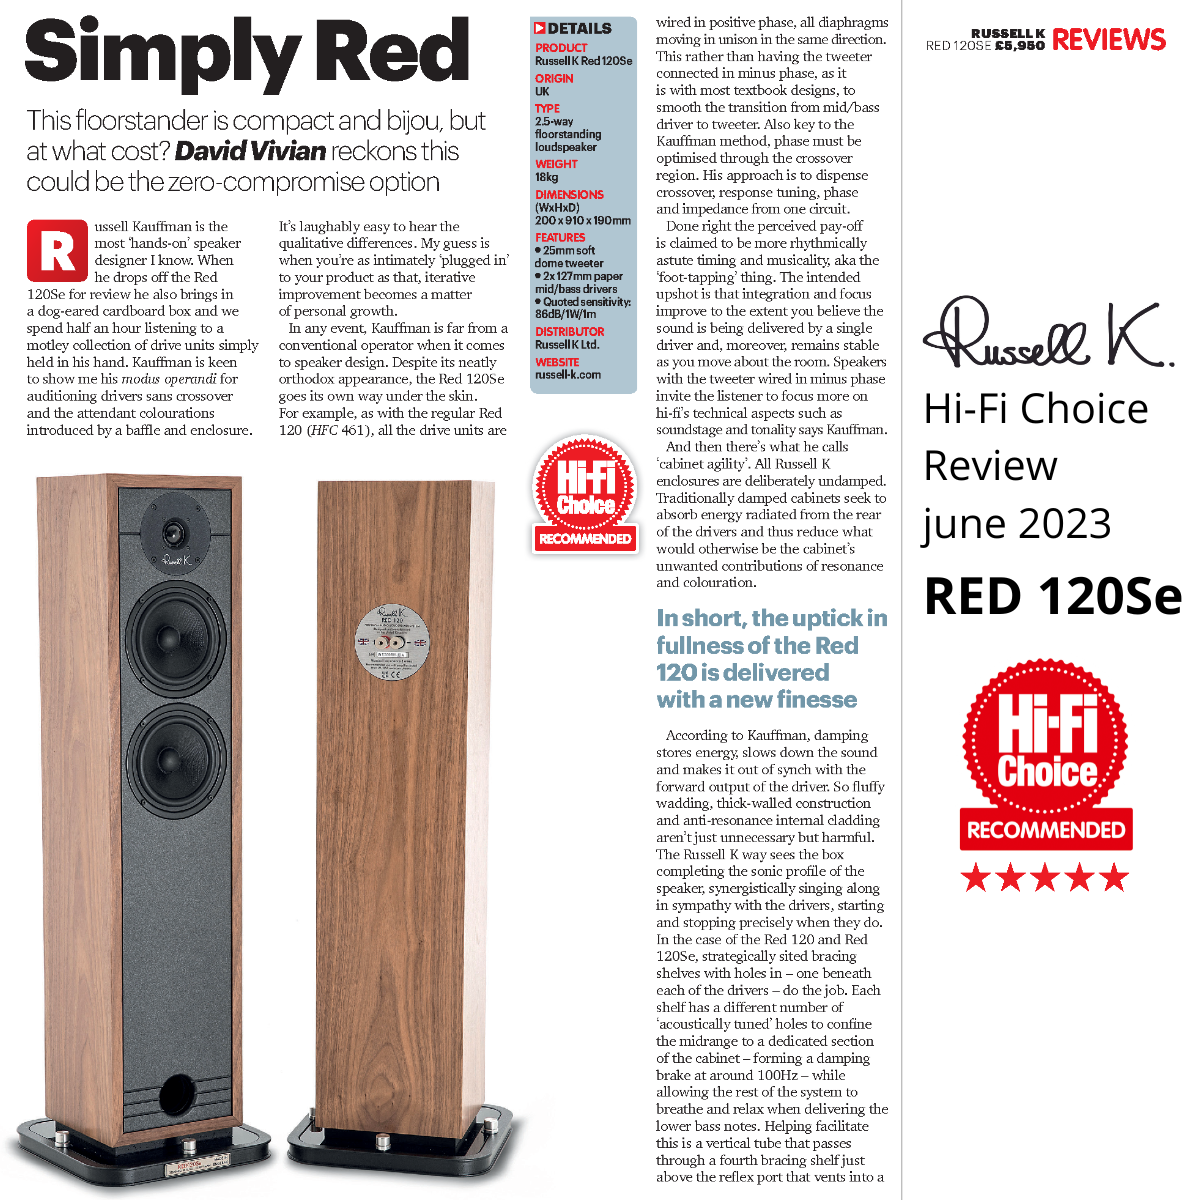 Page 1of2 review Hi-Fi Choice june 2023 - all stars recommened - Russell K Red 120Se